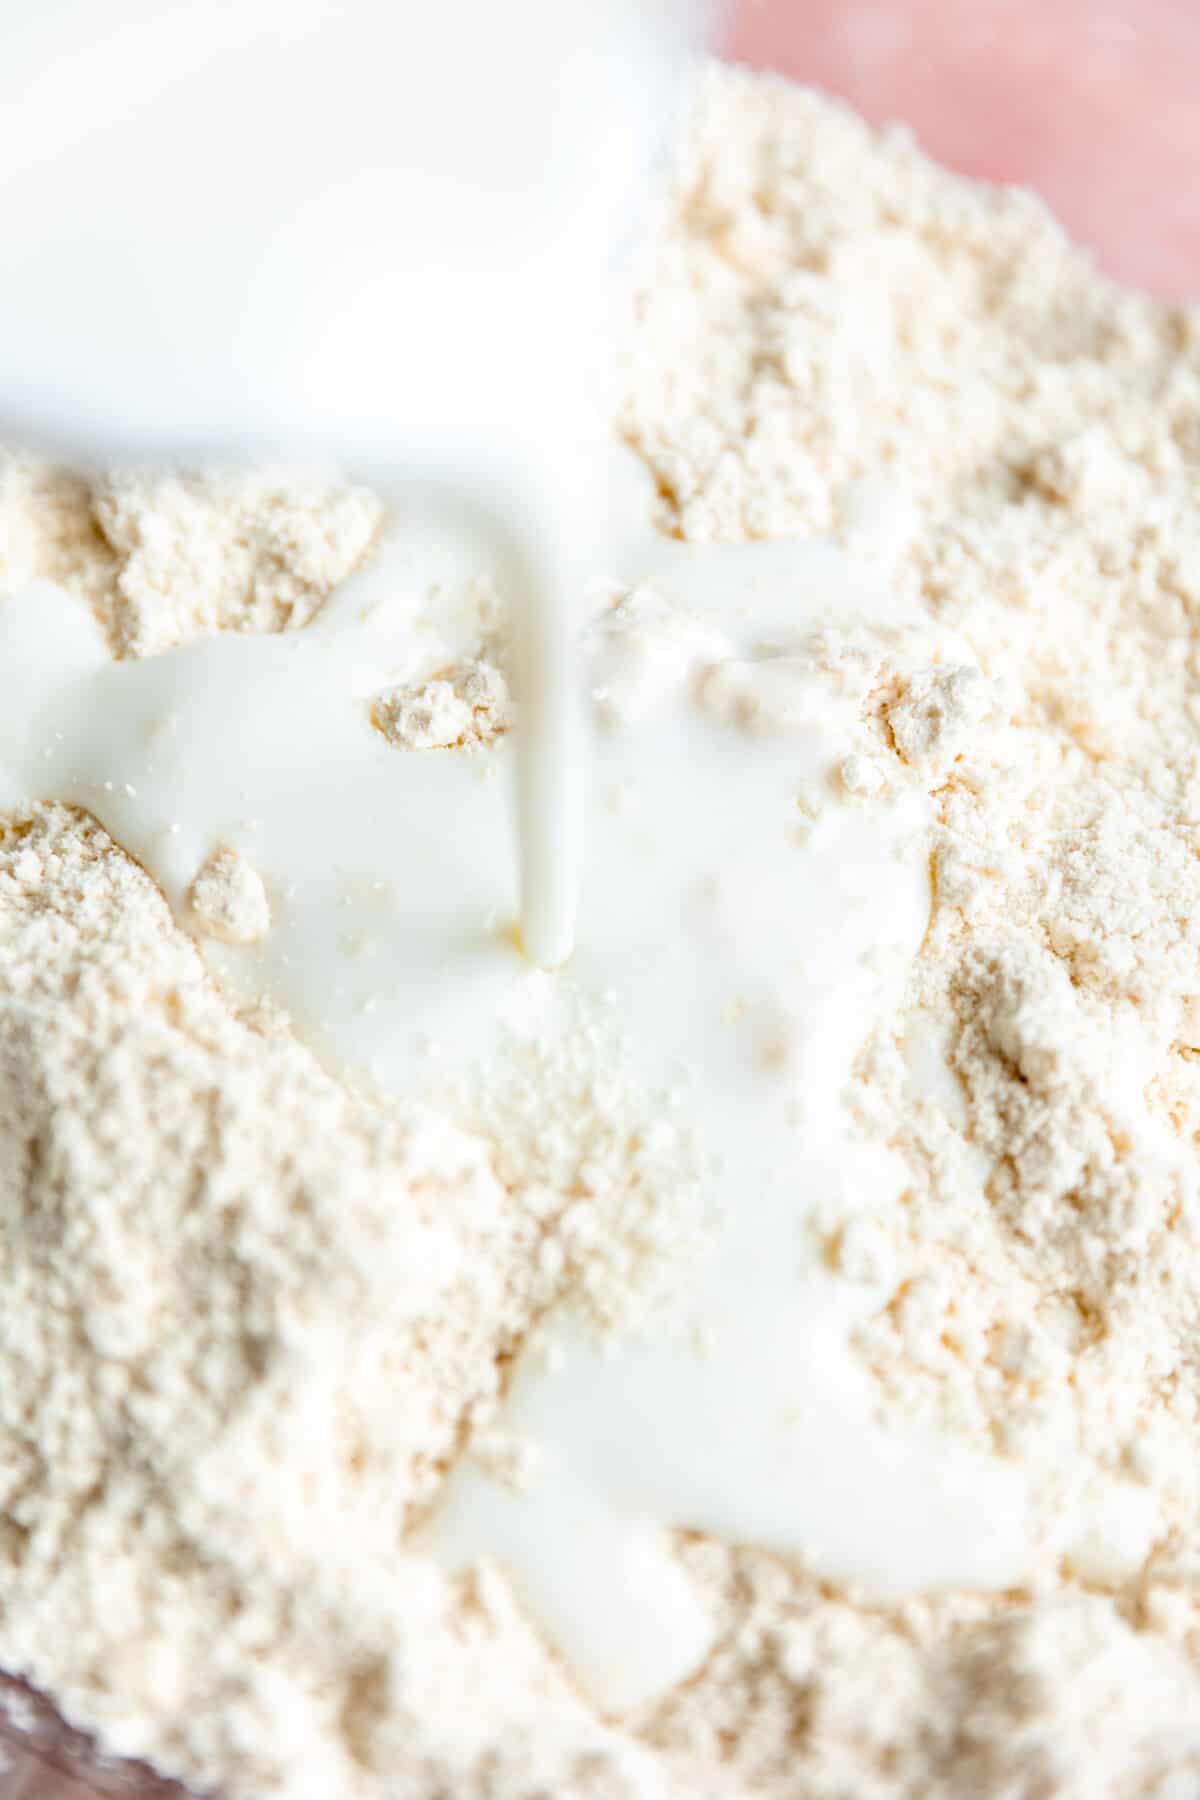 Buttermilk being poured into a bowl of flour.